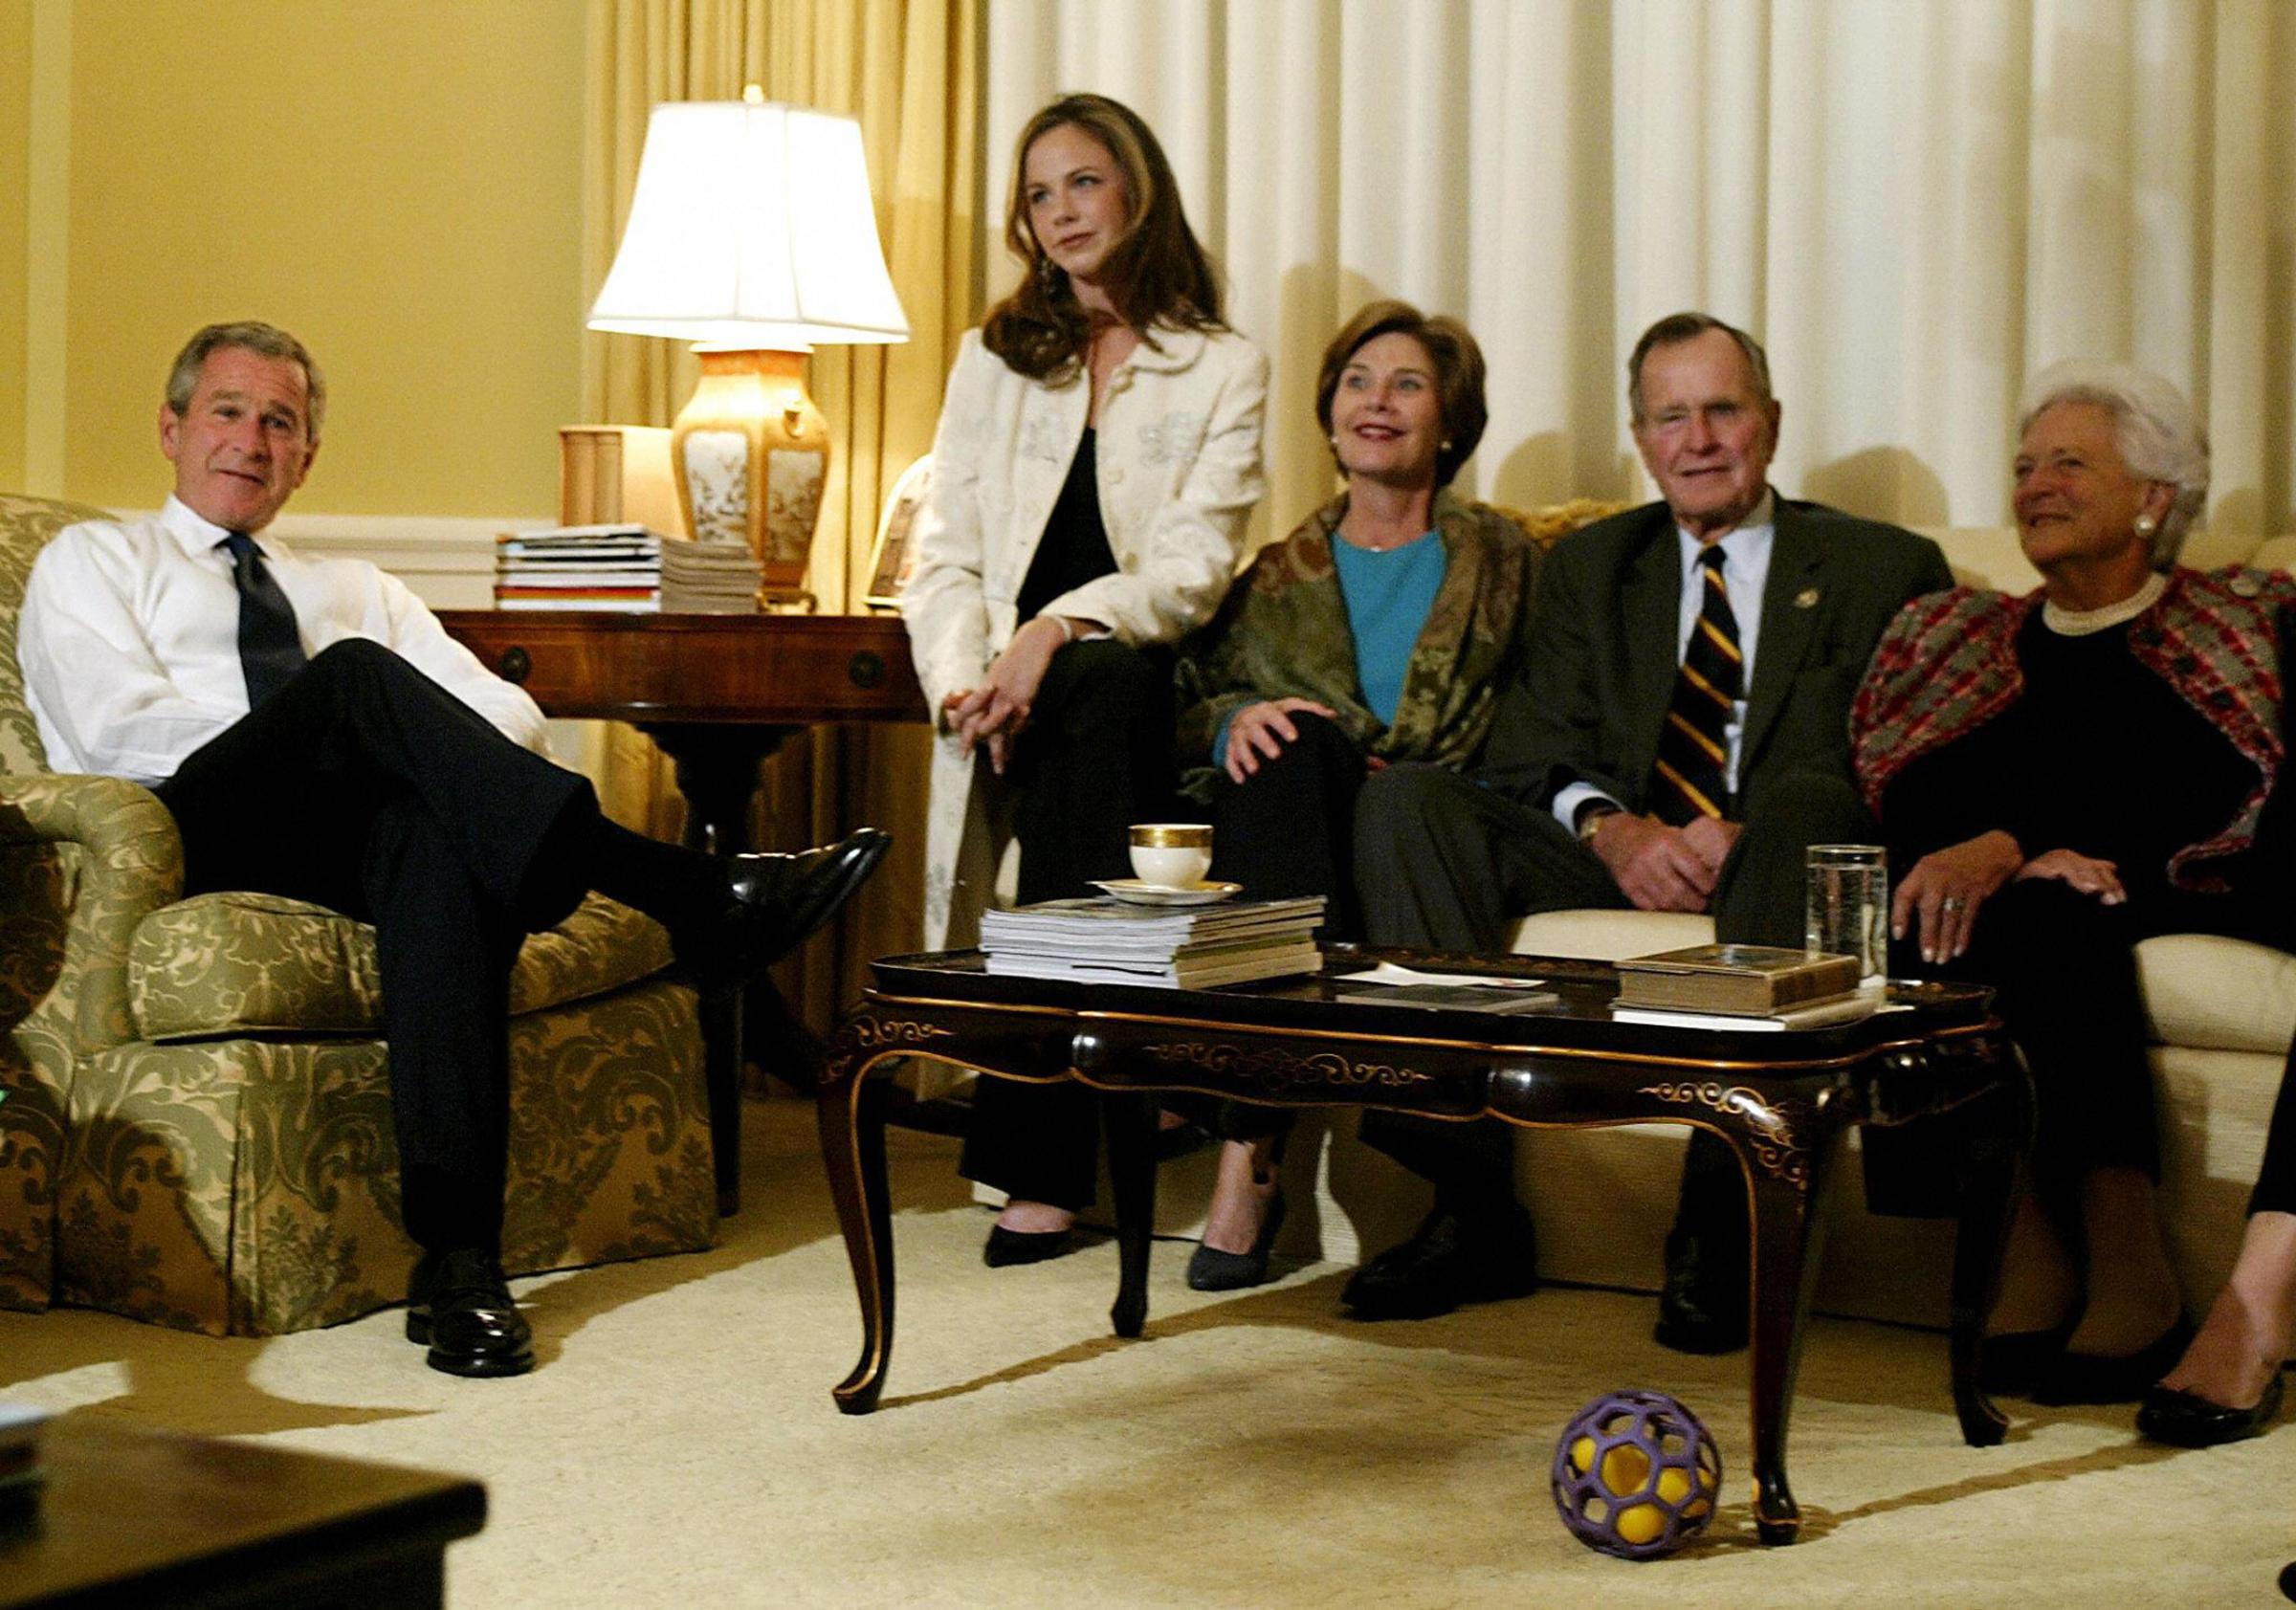 President-elect George W. Bush (L) and First Lady Laura Bush (C) are joined by daughter Barbara (2L), former US president George H. Bush (2R) and his wife former first lady Barbara (R) watching election return in the White House on Nov. 2004